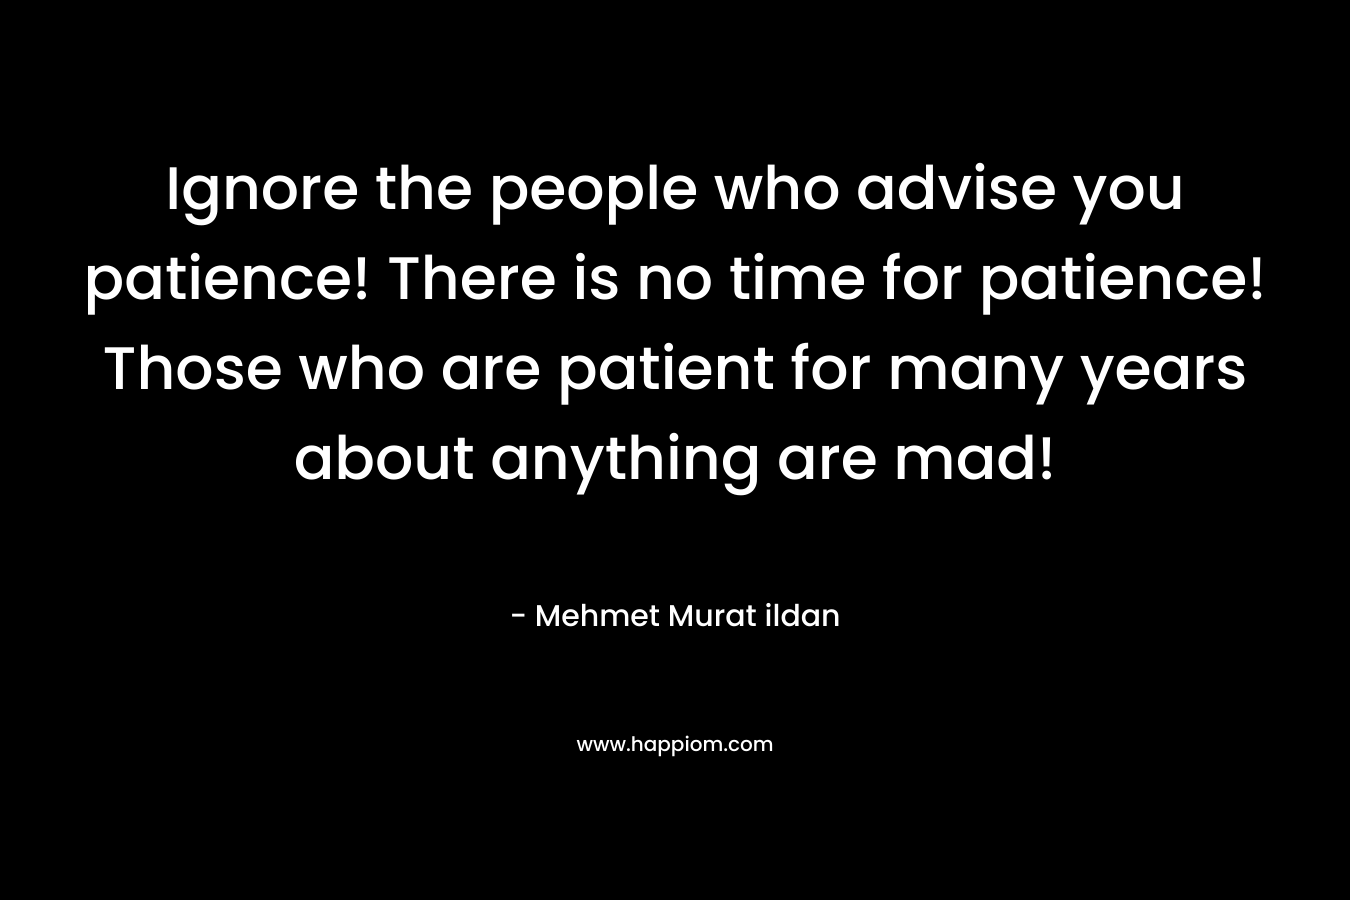 Ignore the people who advise you patience! There is no time for patience! Those who are patient for many years about anything are mad! – Mehmet Murat ildan